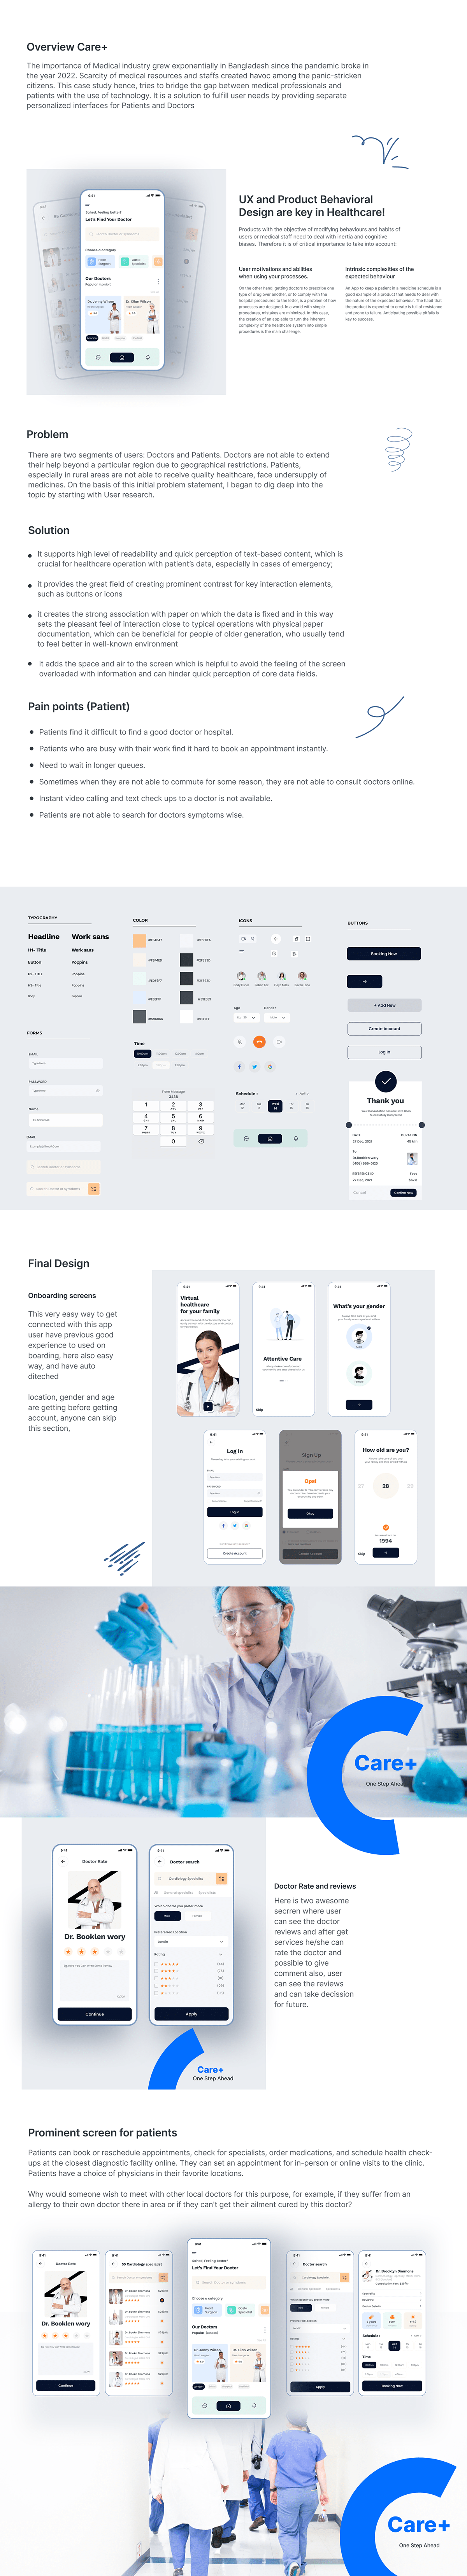 app design booking app Booking Application doctor booking app Health Care App Medical app Medical App Design Medical Application Mobile app user experience